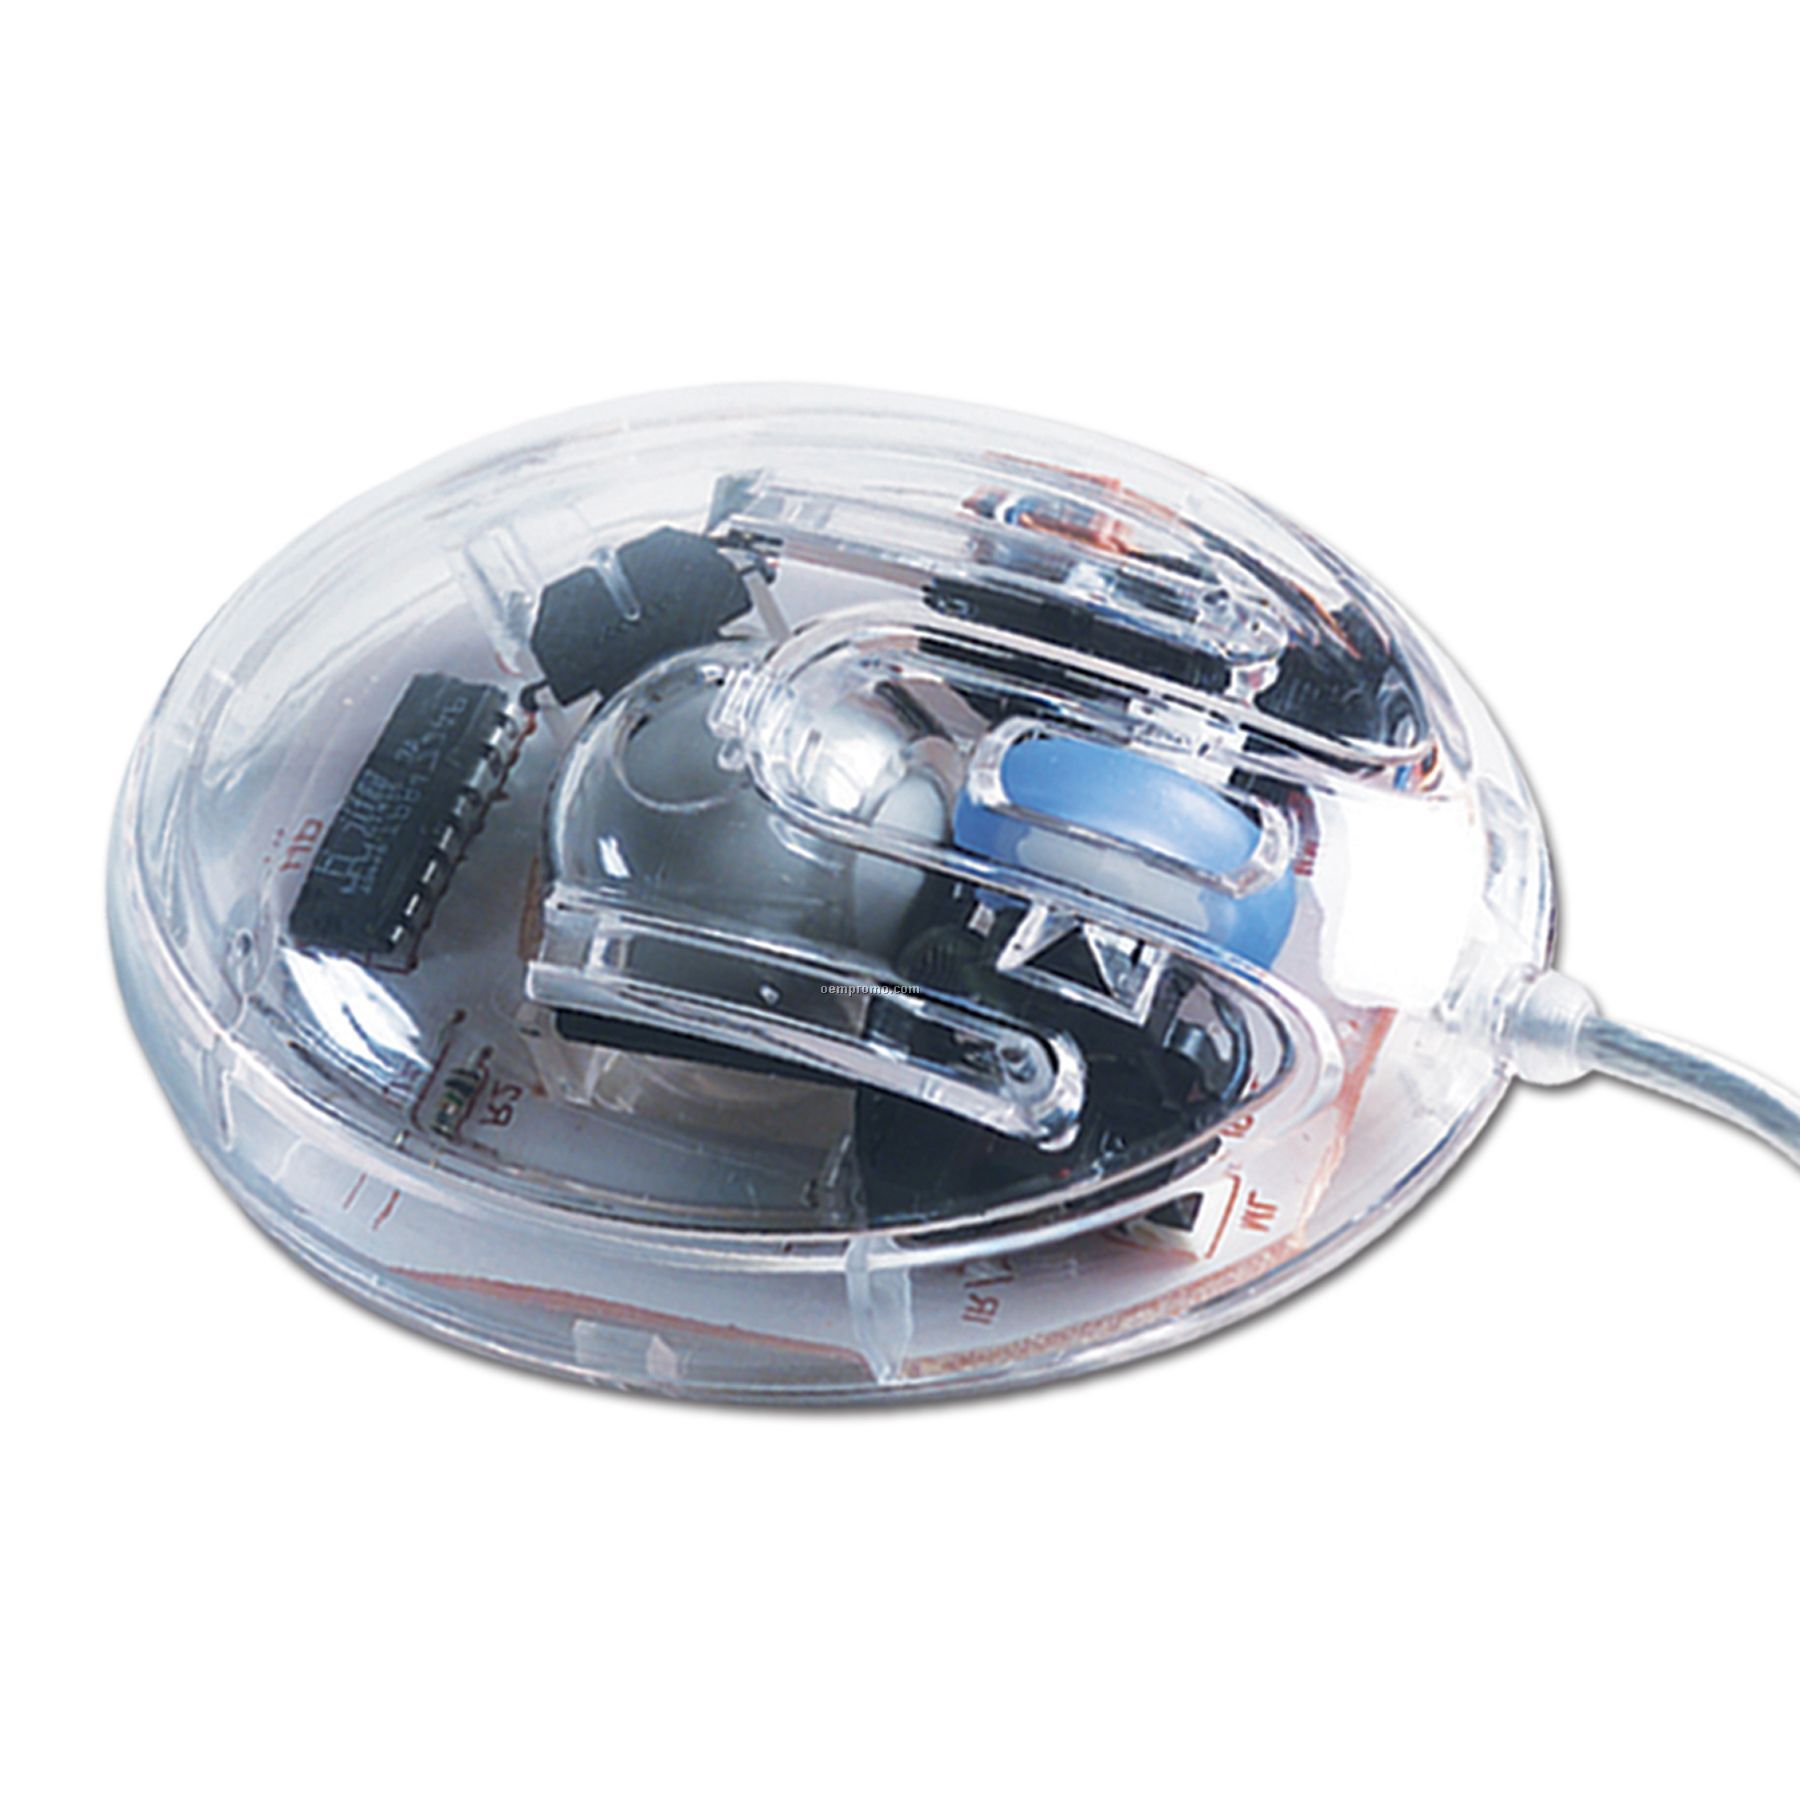 Translucent Computer Mouse W/ Scroll Wheel